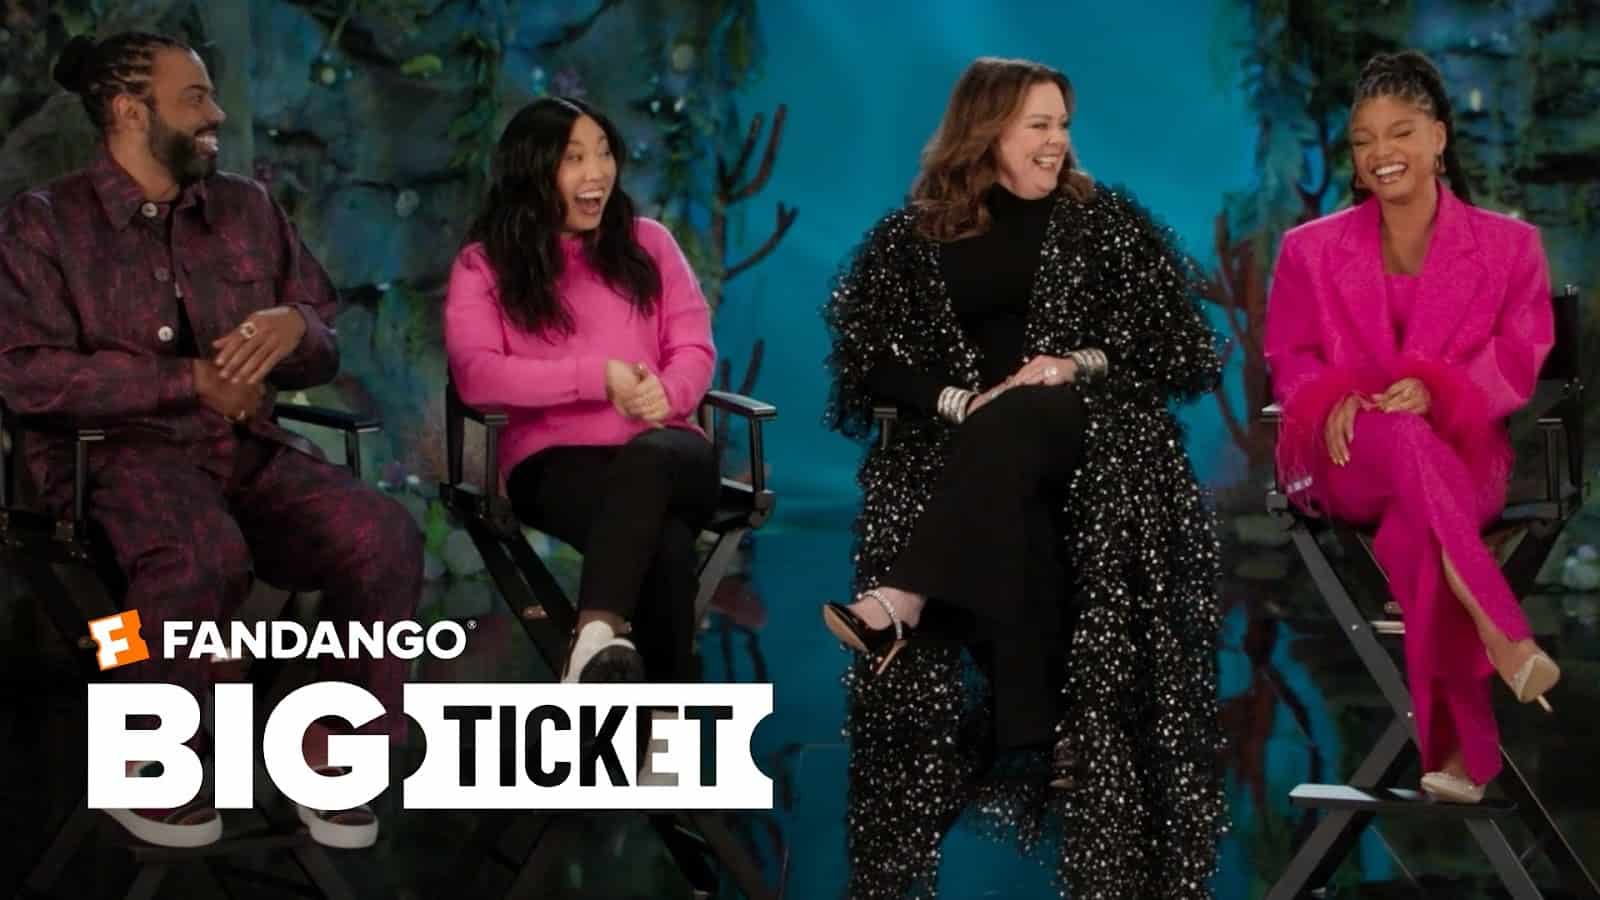 Fandango Launches “Big Ticket” Video Series Featuring Behind-the-Scenes Looks at the Year’s Biggest Films 19